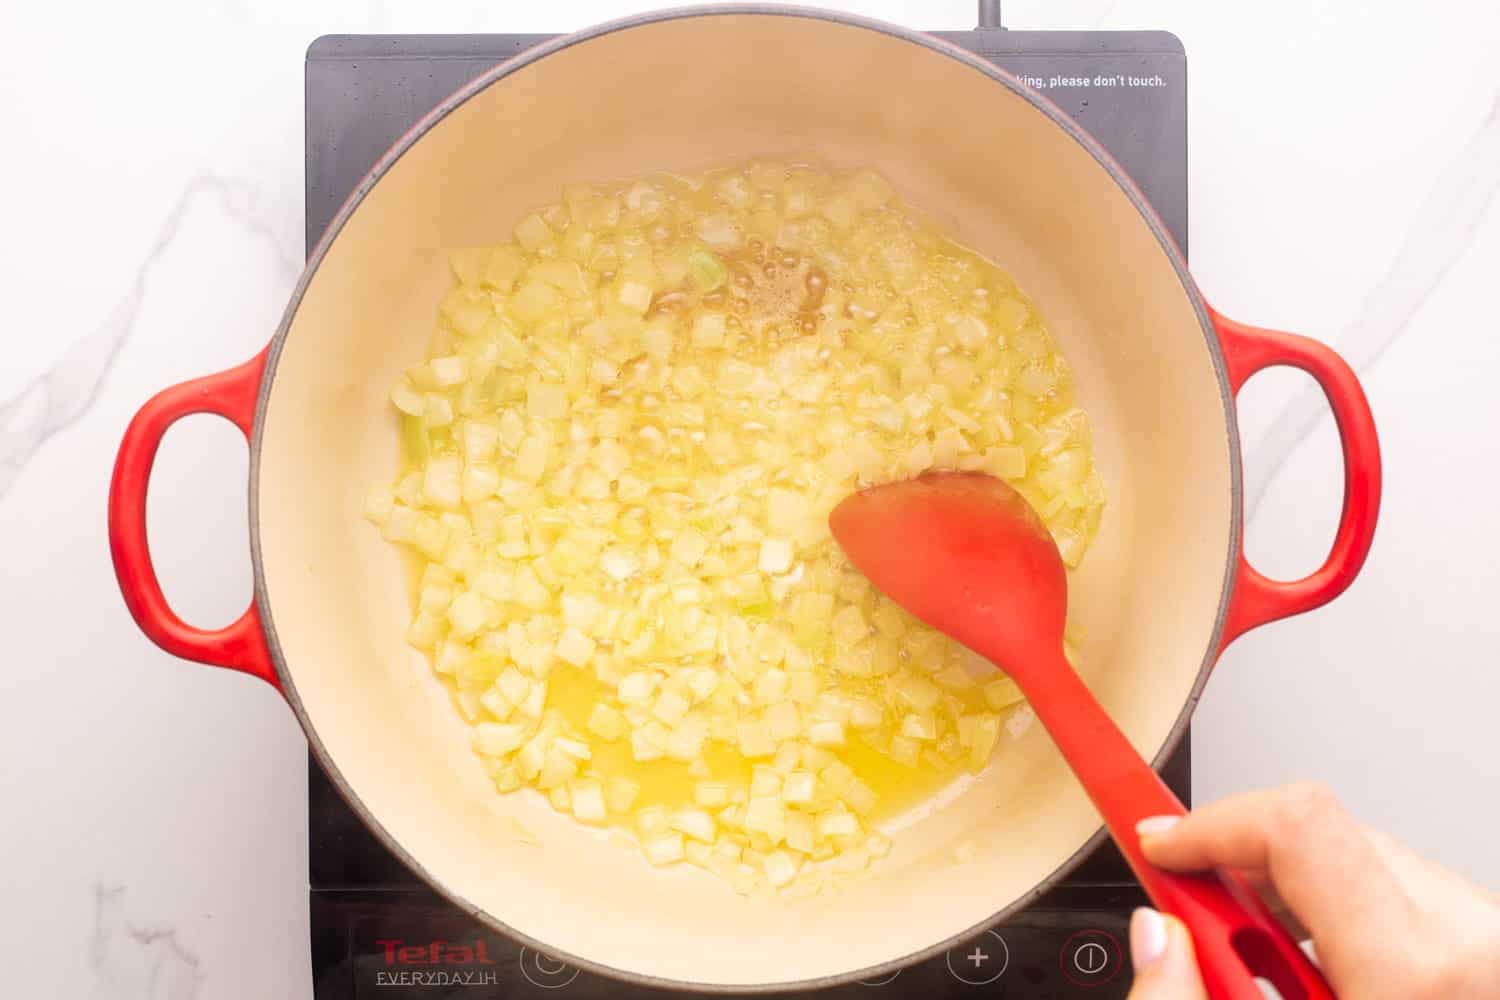 diced onions sauteed in butter in a ceramic coated cast iron dutch oven. viewed from above, the onions are being stirred with a red spoon.